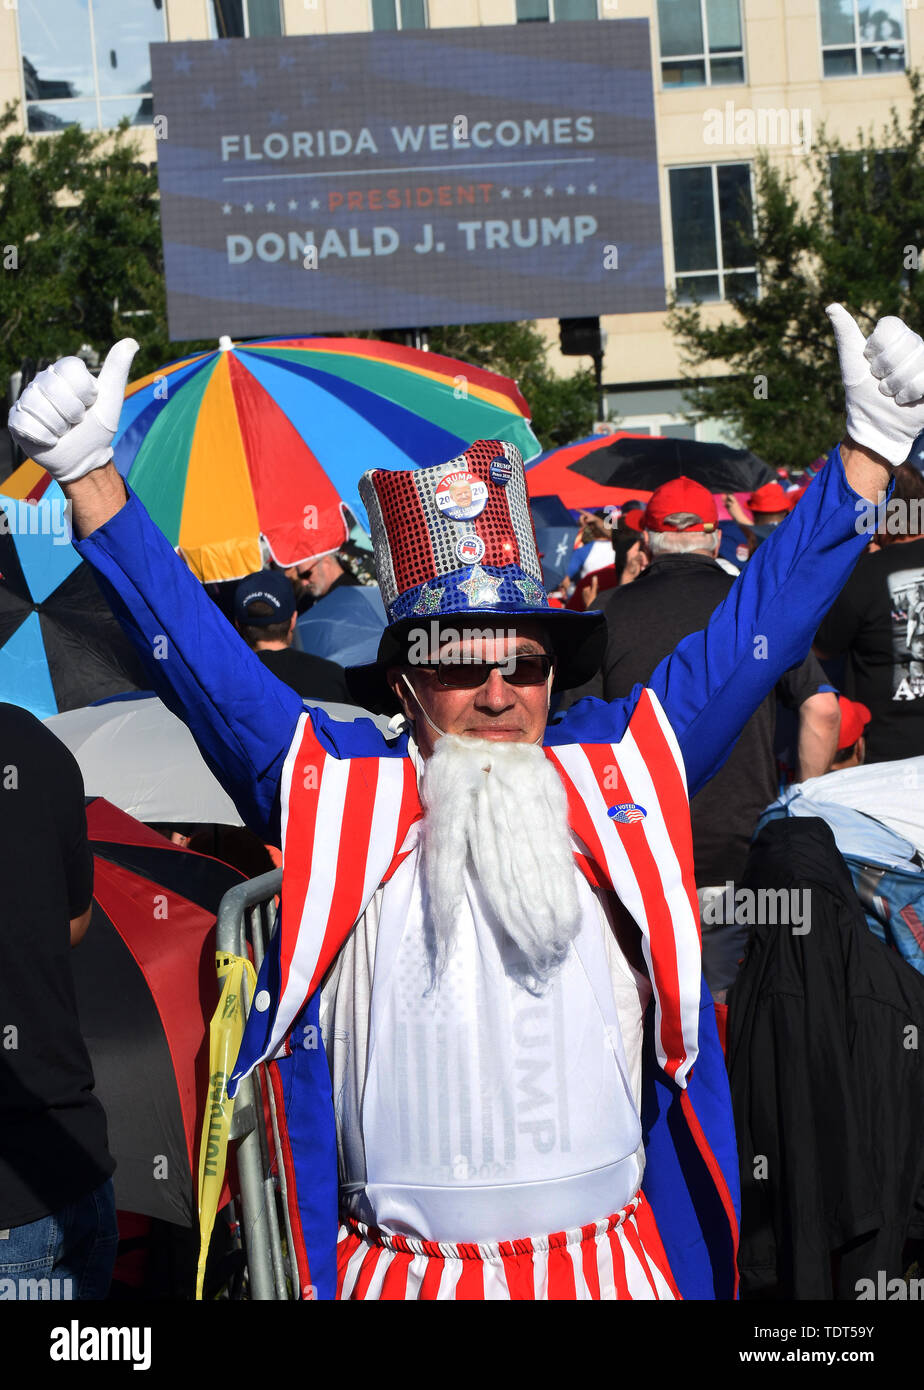 Orlando, Florida, USA. 18th June, 2019. A supporter of U.S. President Donald Trump dressed as Uncle Sam waits in line for a Make America Great Again rally at the Amway Center on June 18, 2019 in Orlando, Florida. The rally is billed as Trump's kick-off event for his campaign for re-election in 2020. (Paul Hennessy/Alamy) Credit: Paul Hennessy/Alamy Live News Stock Photo